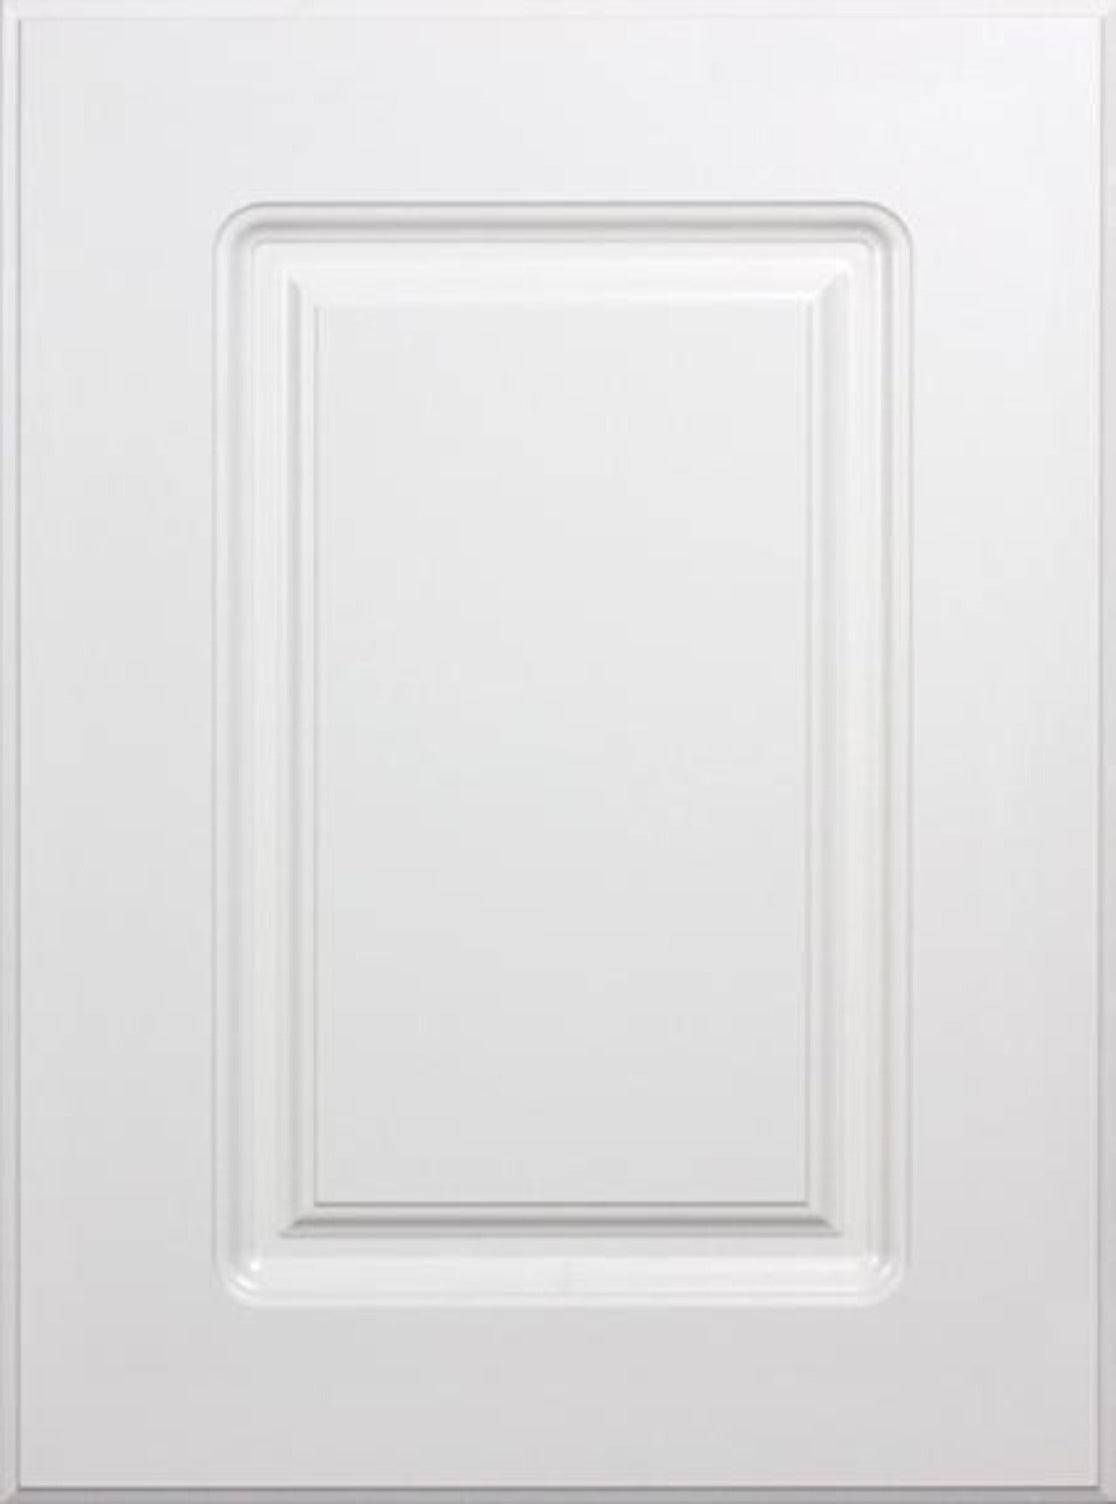 White Smooth Satin Naples Thermofoil Raised Square Custom Cabinet Doors